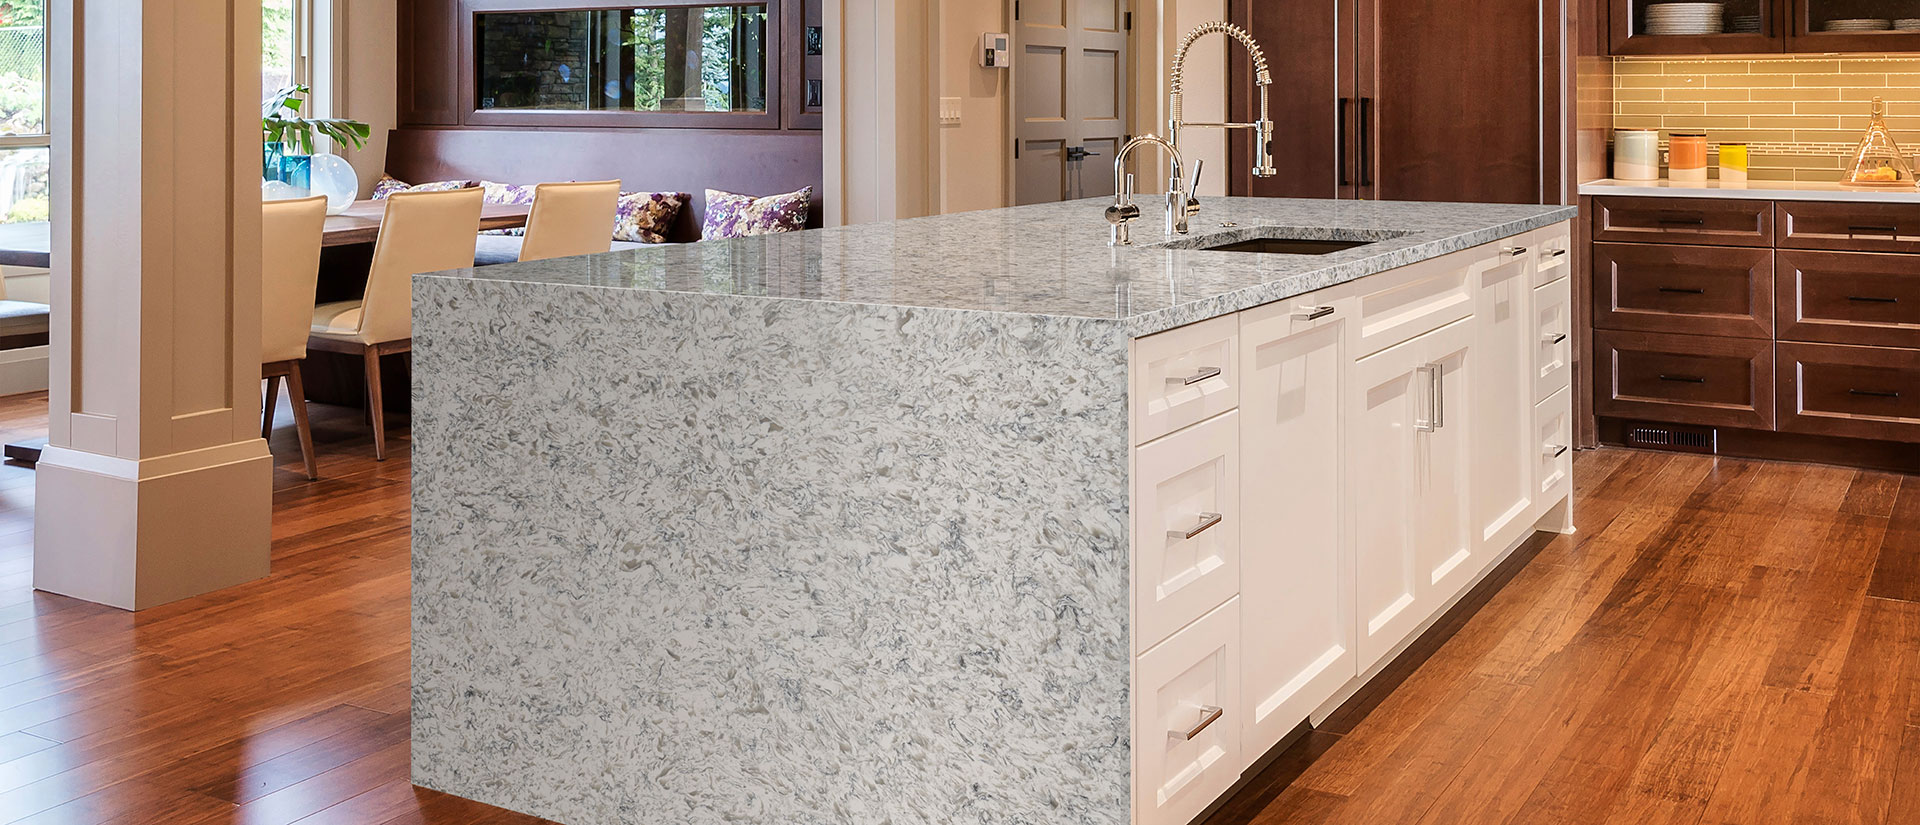 Montclair White Quartz countertop in a contemporary kitchen with a view